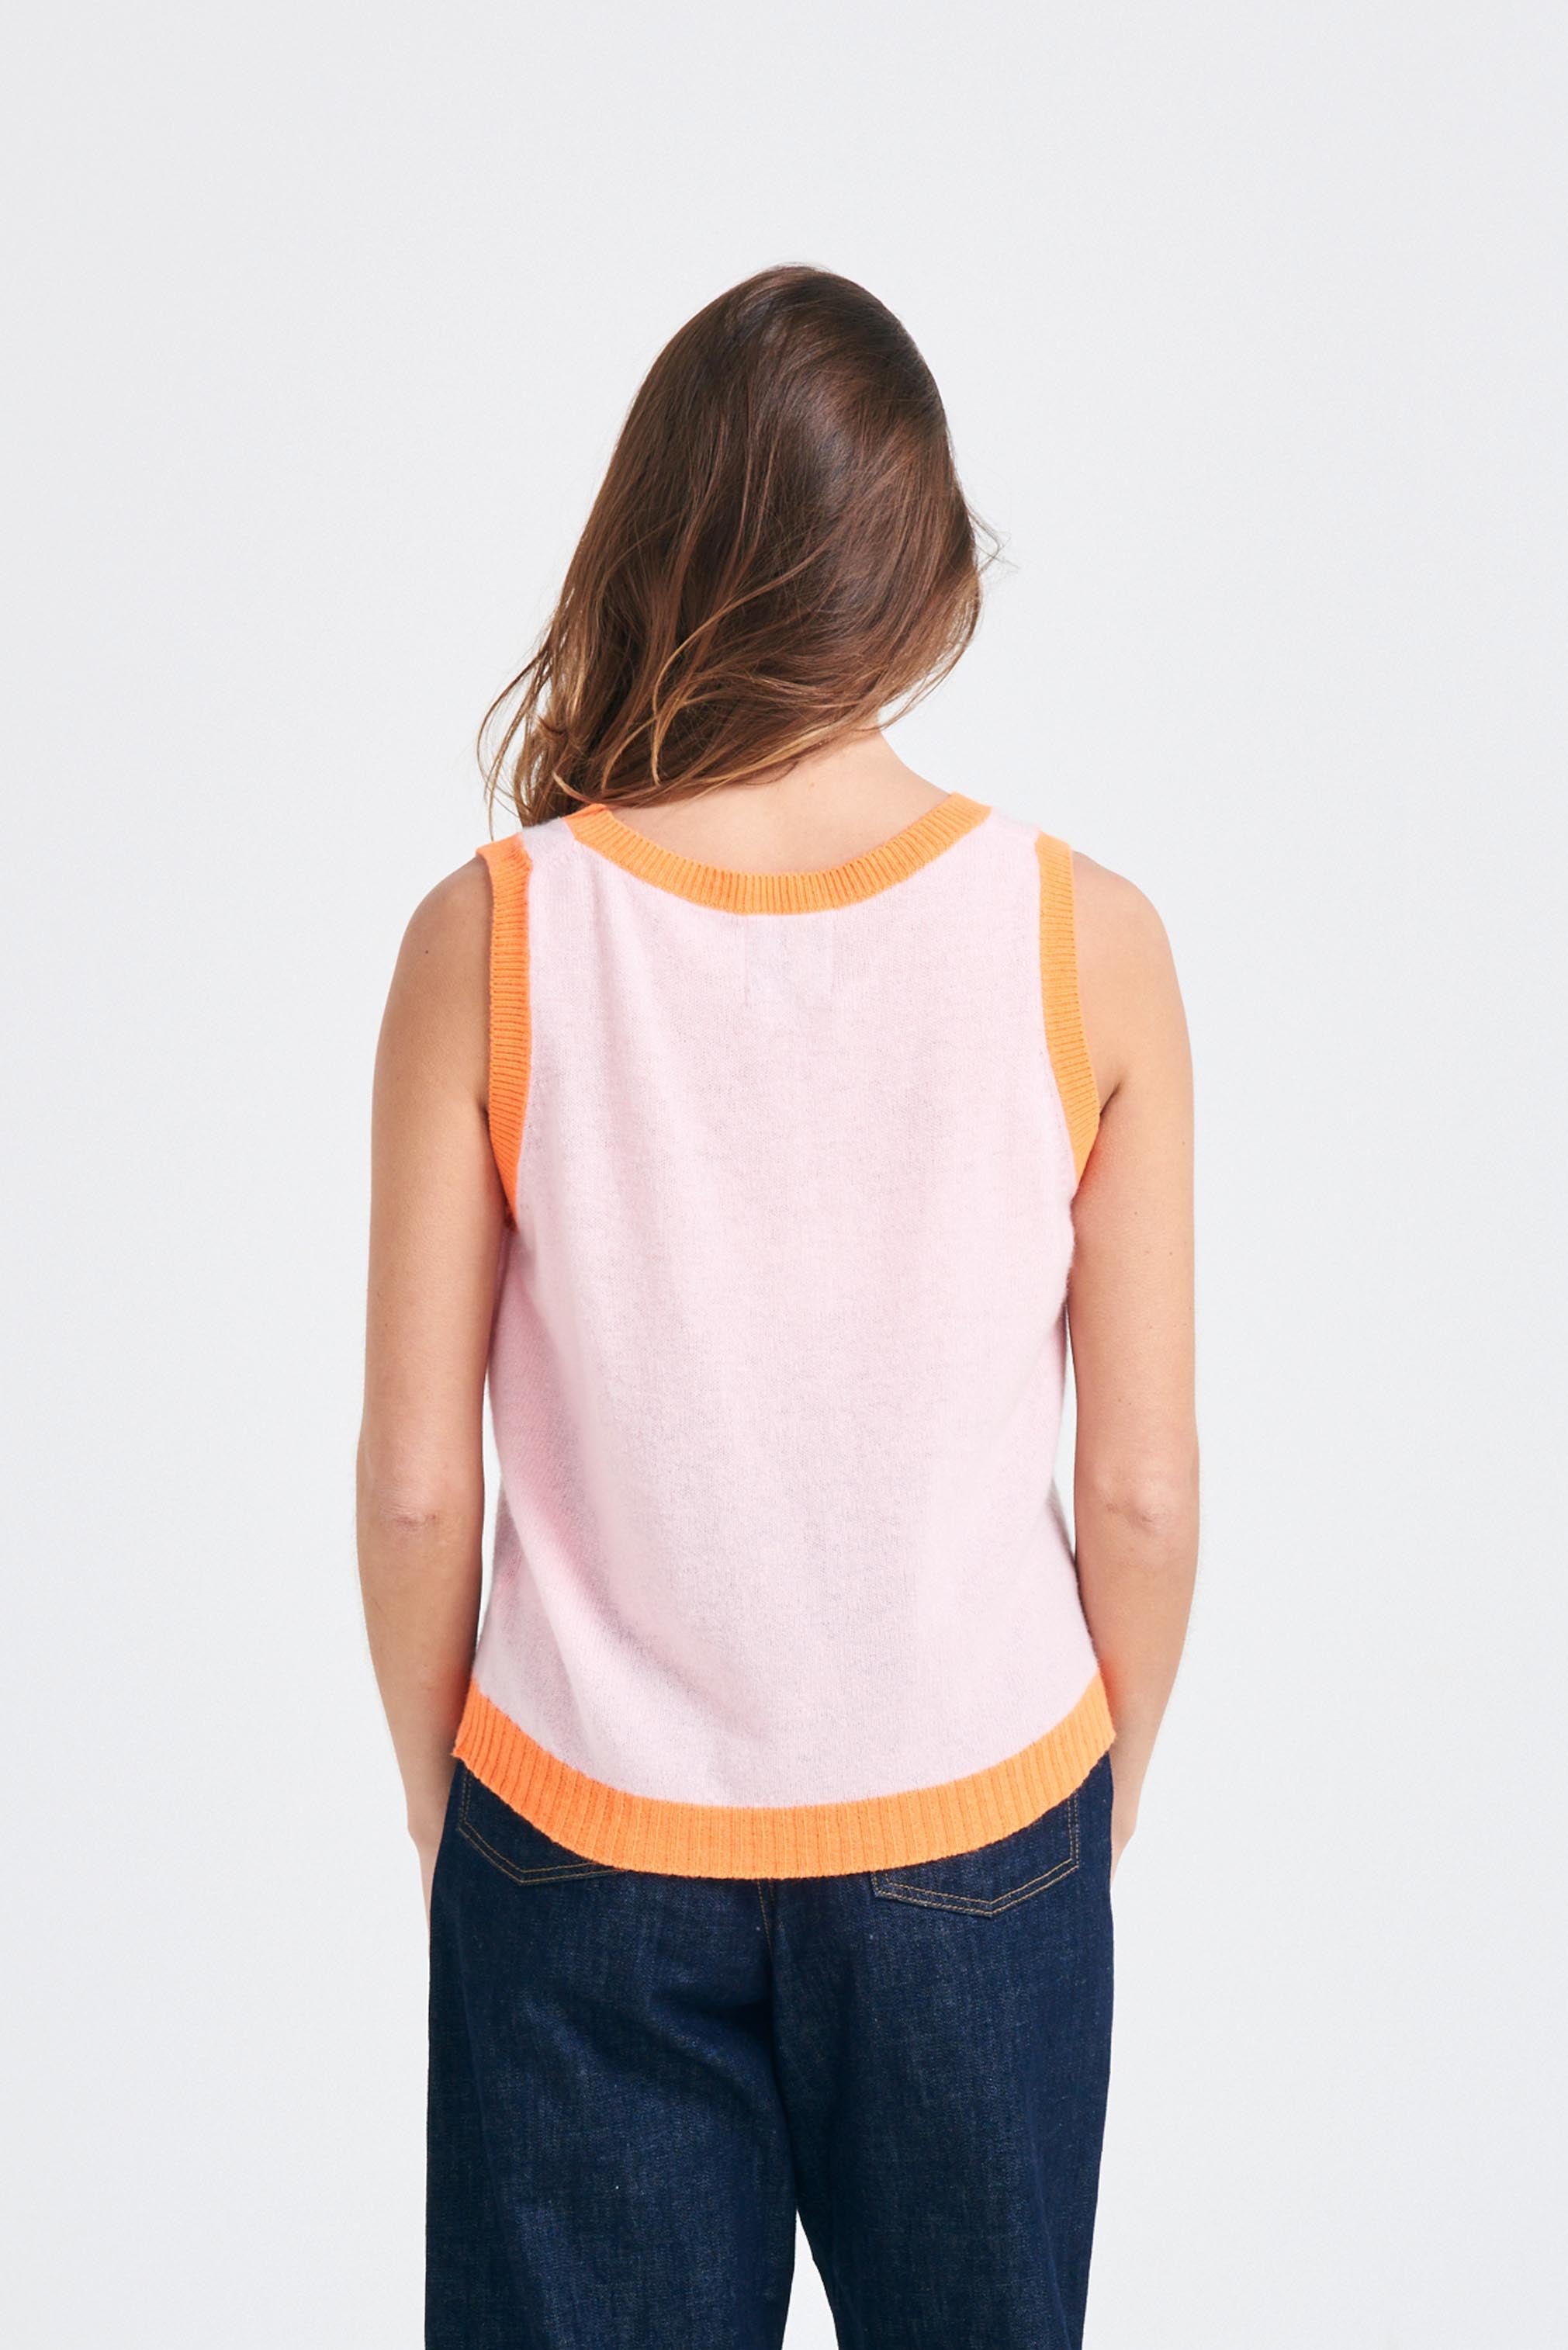 Brown haired female model wearing Jumper1234 Pale pink cashmere vee neck tank with contrast neon orange ribs facing away from the camera